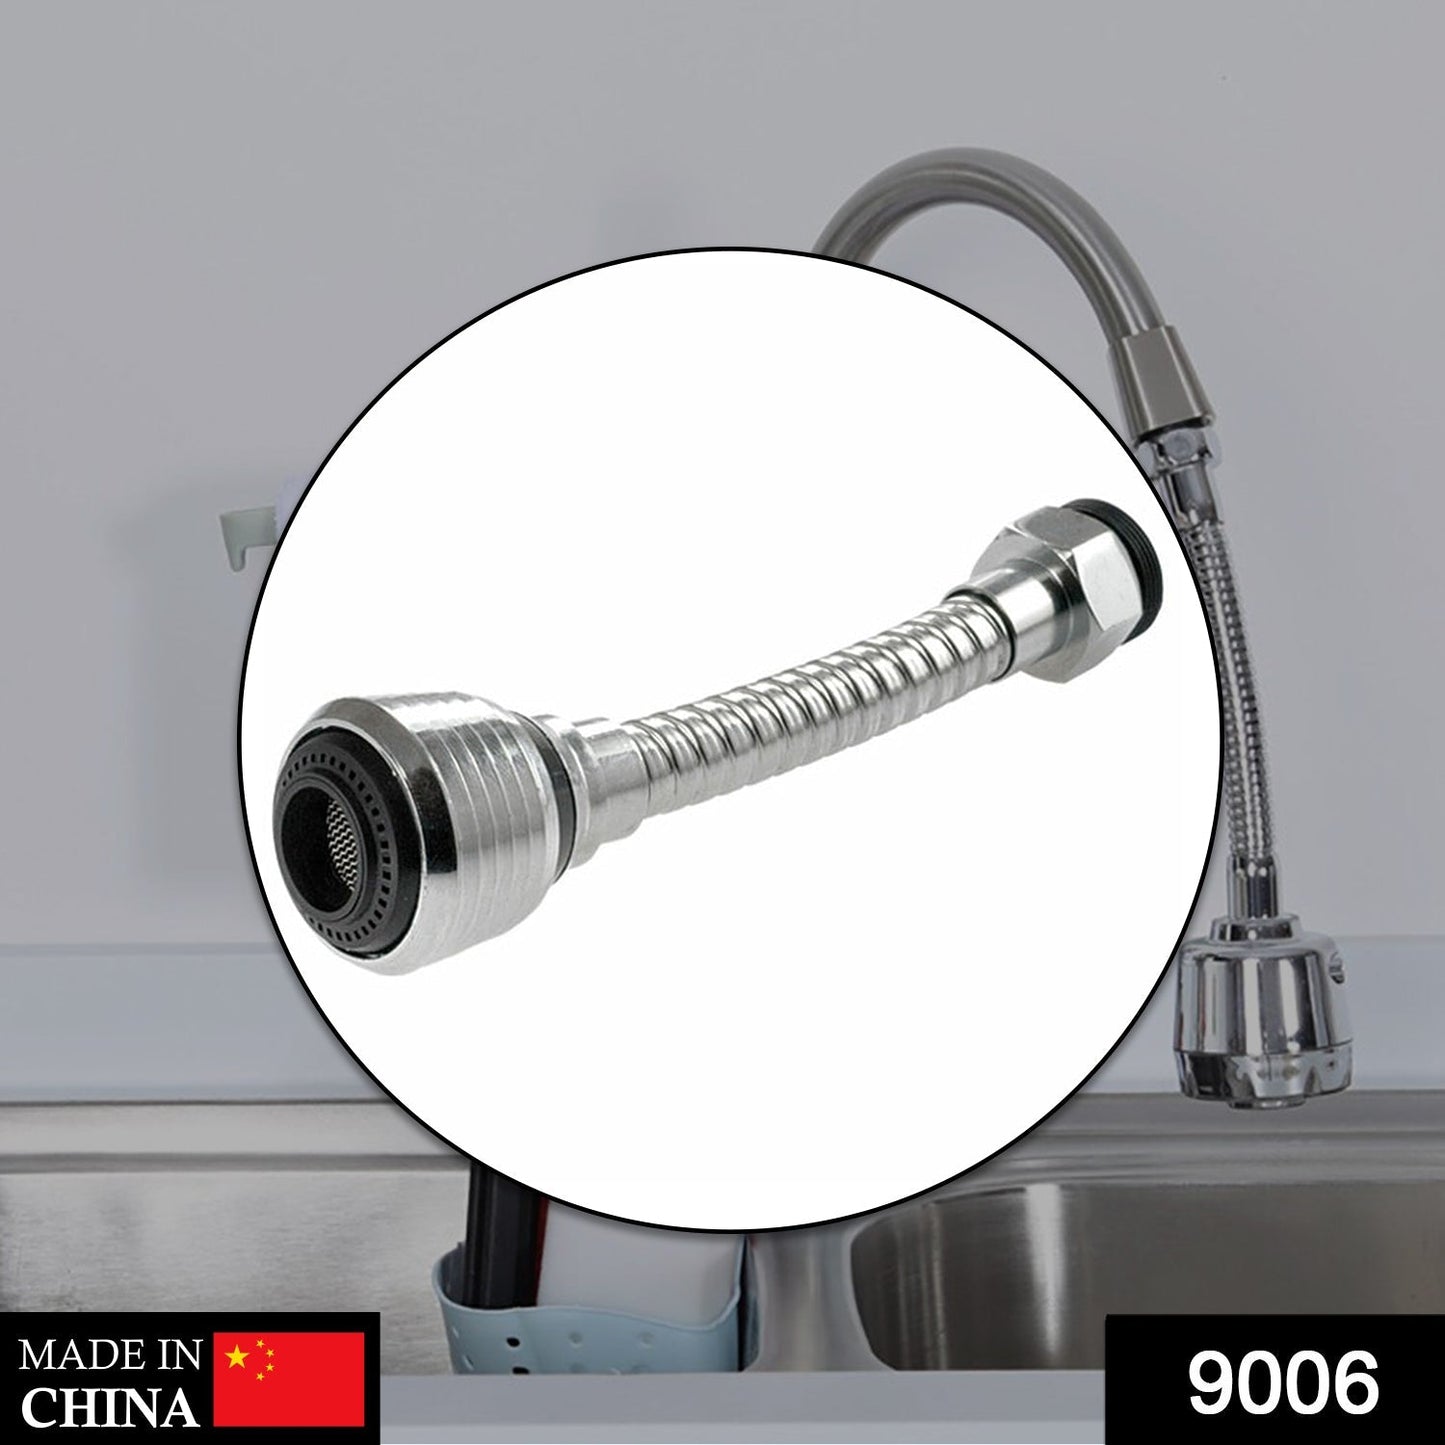 9006 Flexible Water Sprayer and sprinkler used for watering and washing types of things. DeoDap